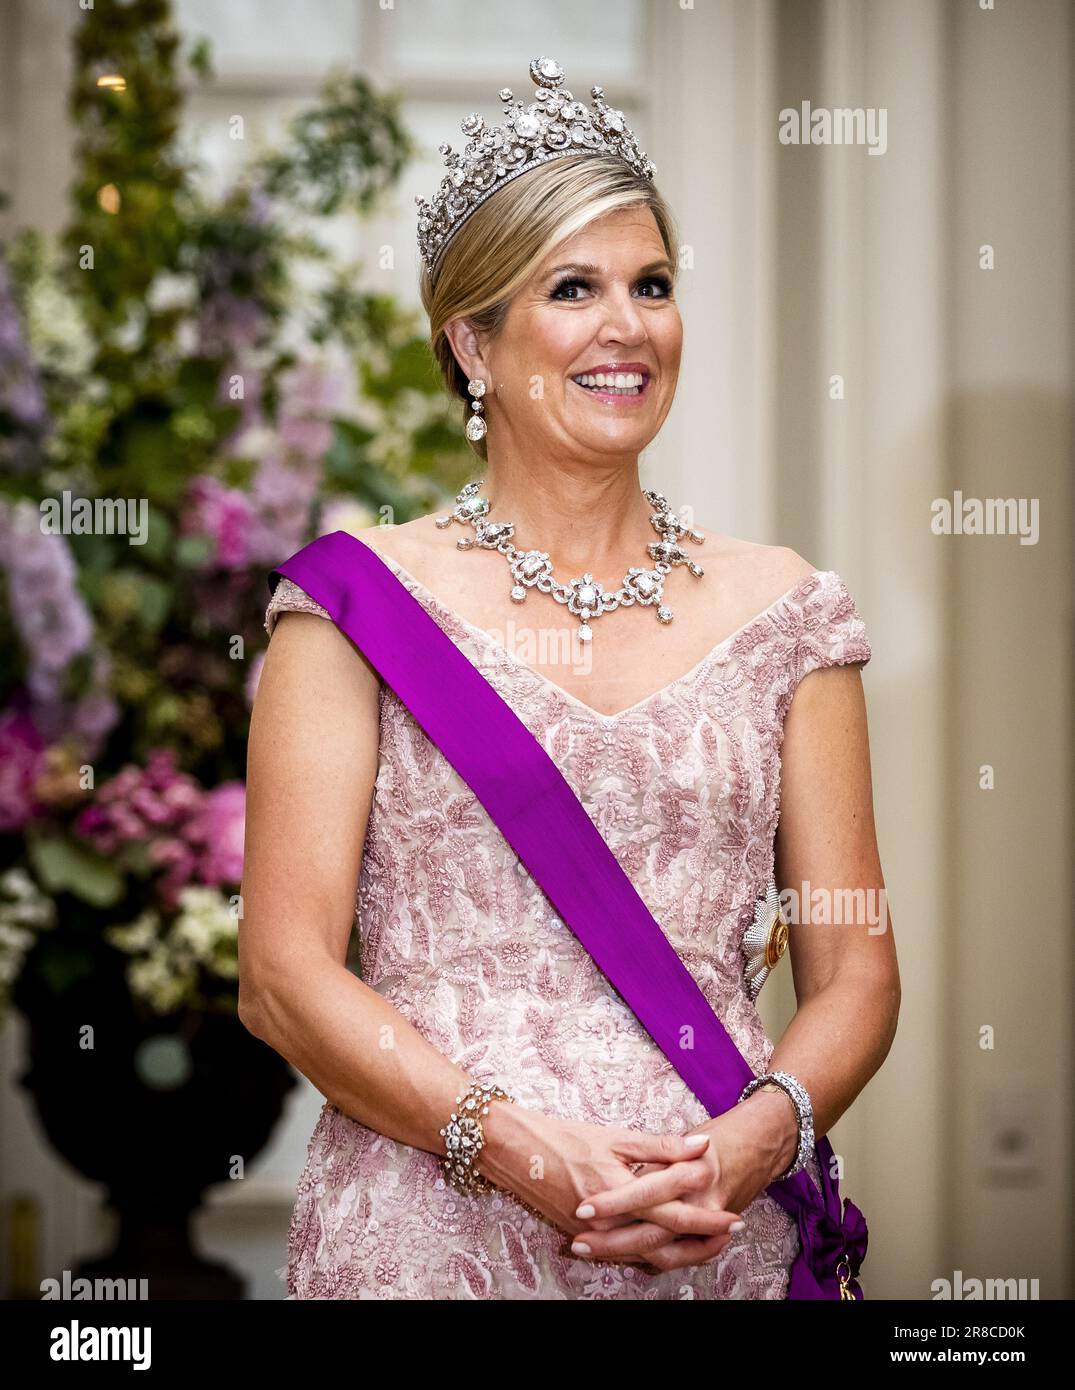 BRUSSELS - Queen Maxima during the passade prior to the state banquet in  the Castle of Laeken on the first day of the state visit to Belgium. The  royal couple will visit